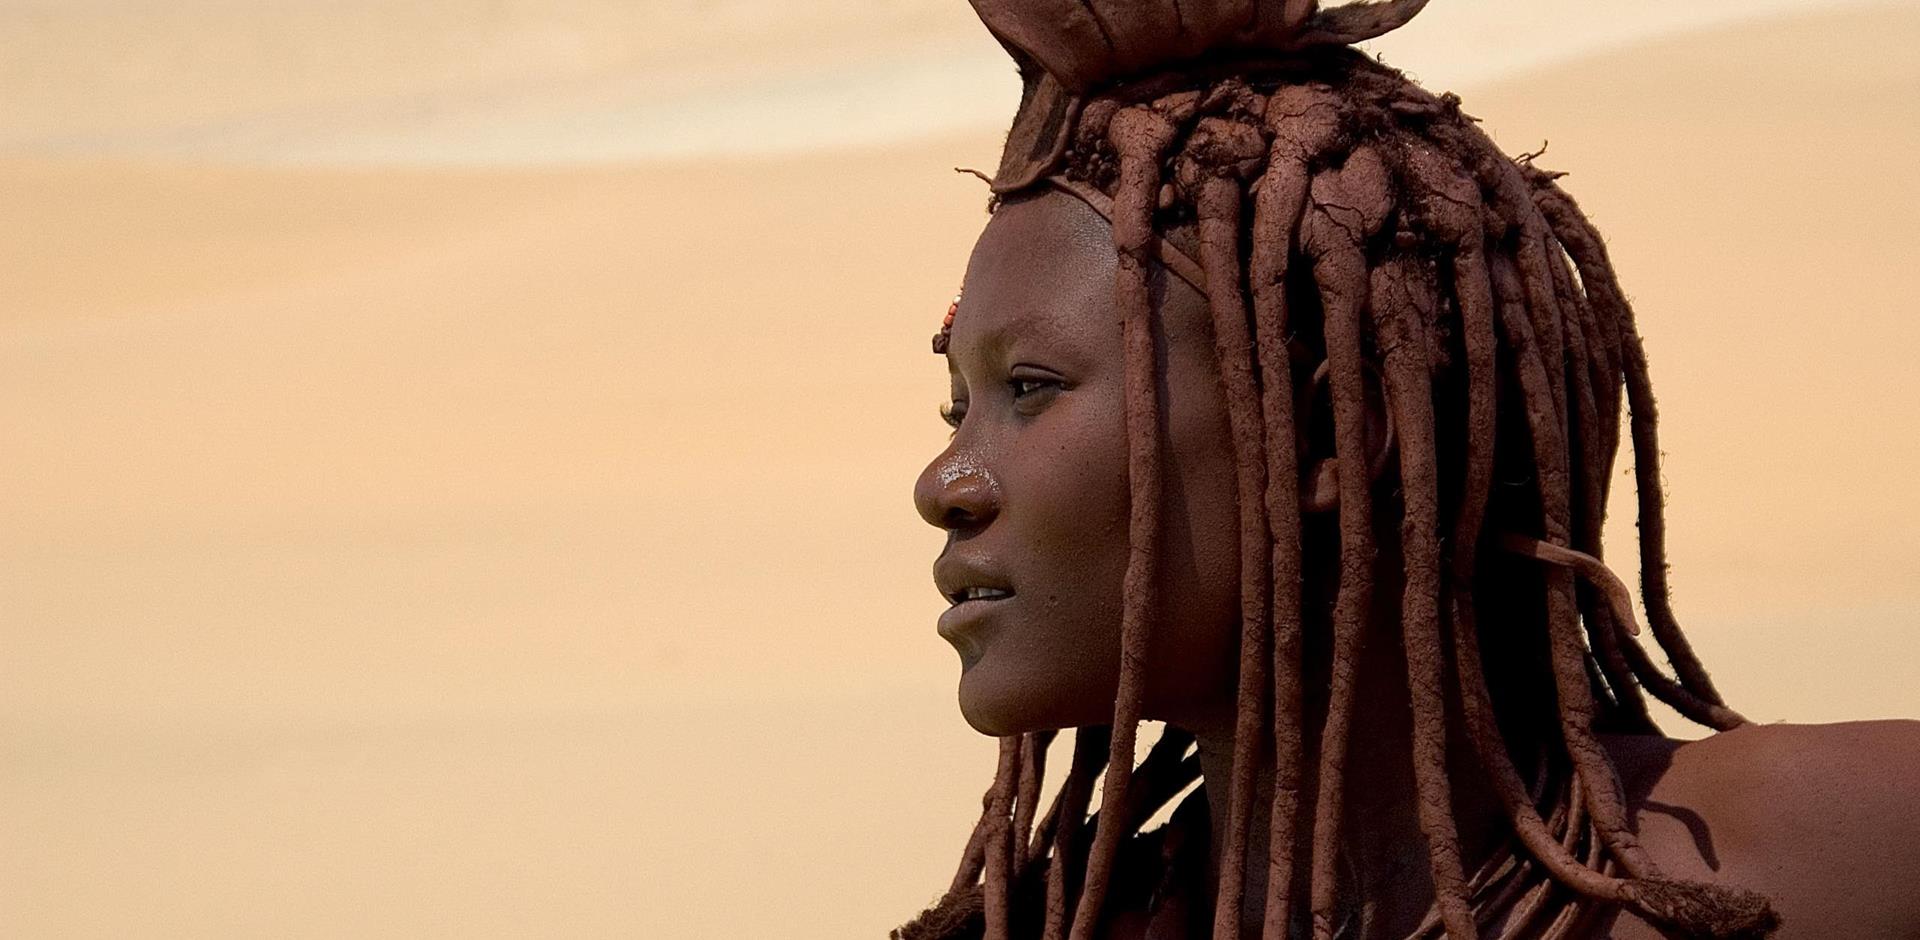 A&K Namibia experience: Meet the Himba people